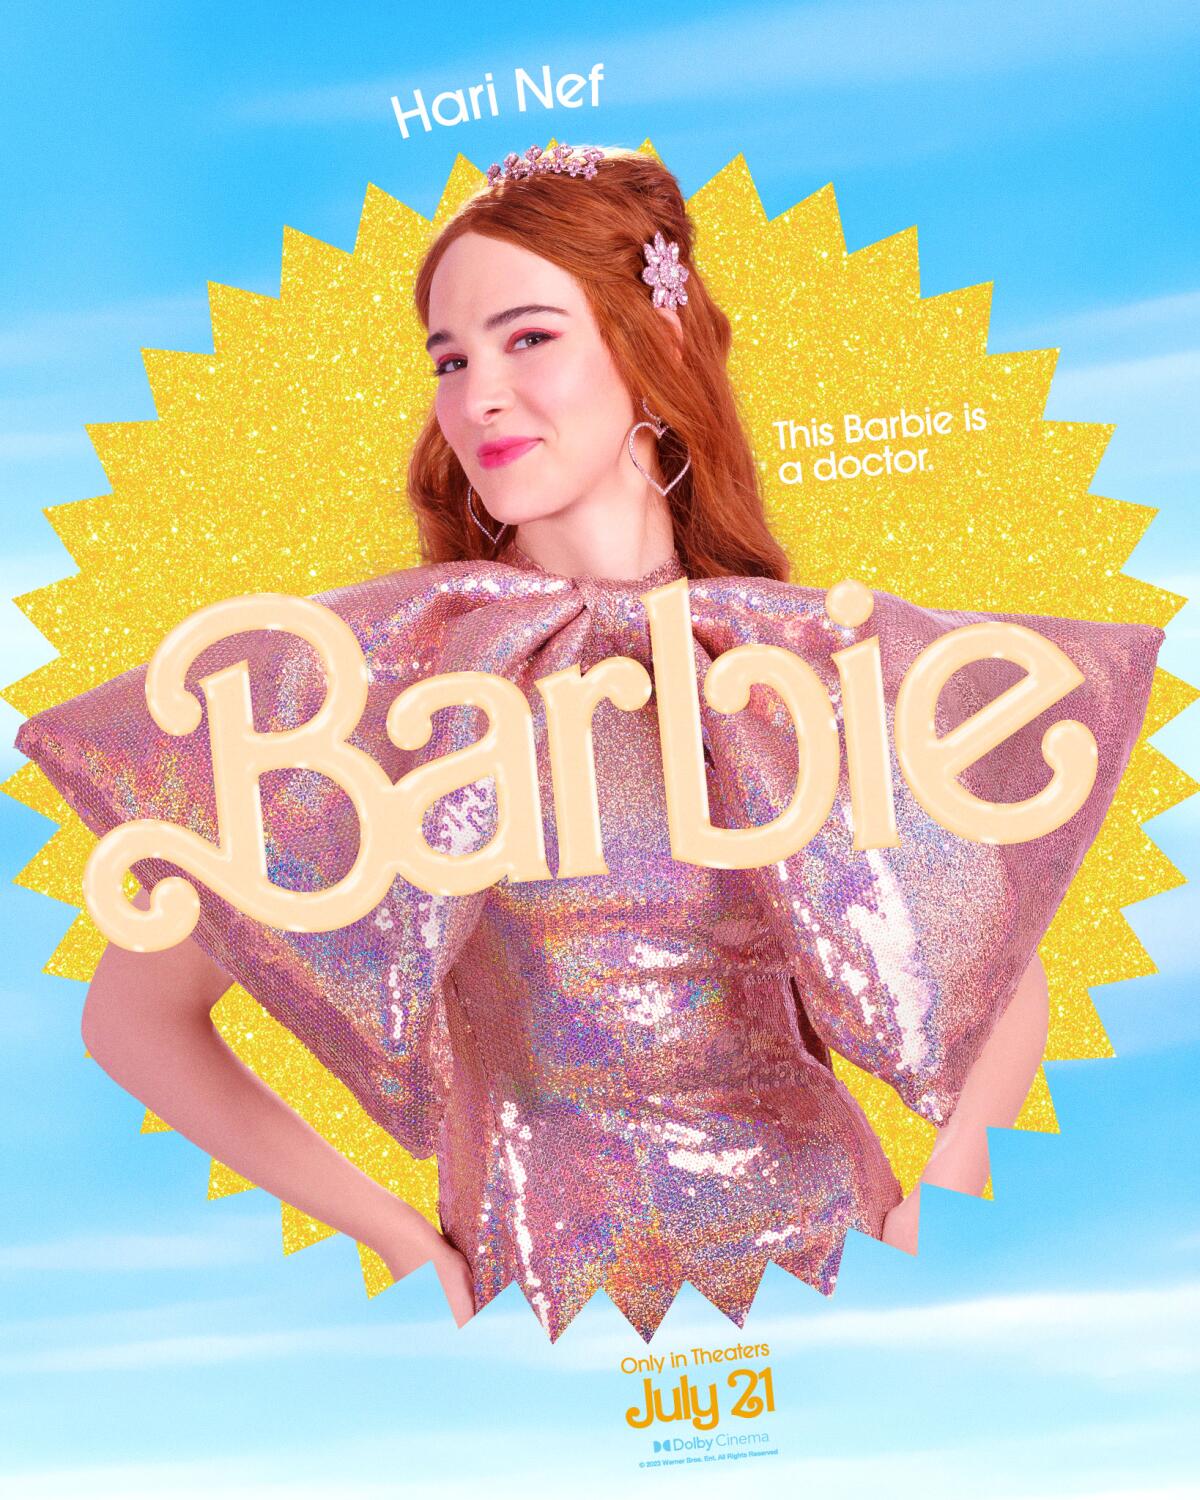 Hari Nef poses with her hands on her hips in a "Barbie" movie poster. She wears a shiny pink dress with poofy sleeves.